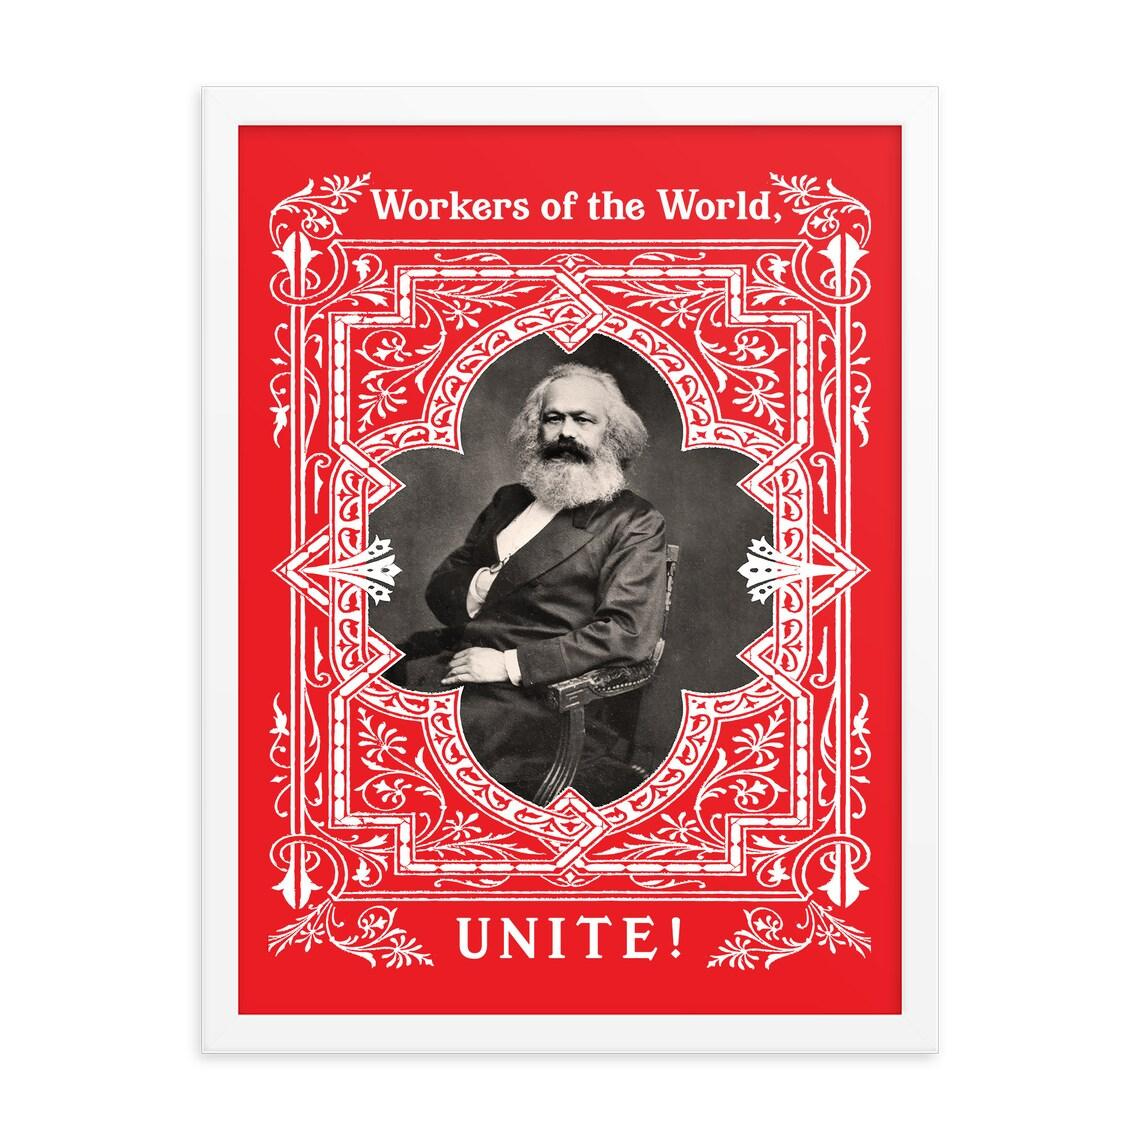 May be a graphic of 1 person and text that says 'Workers of the World, UNITE!'